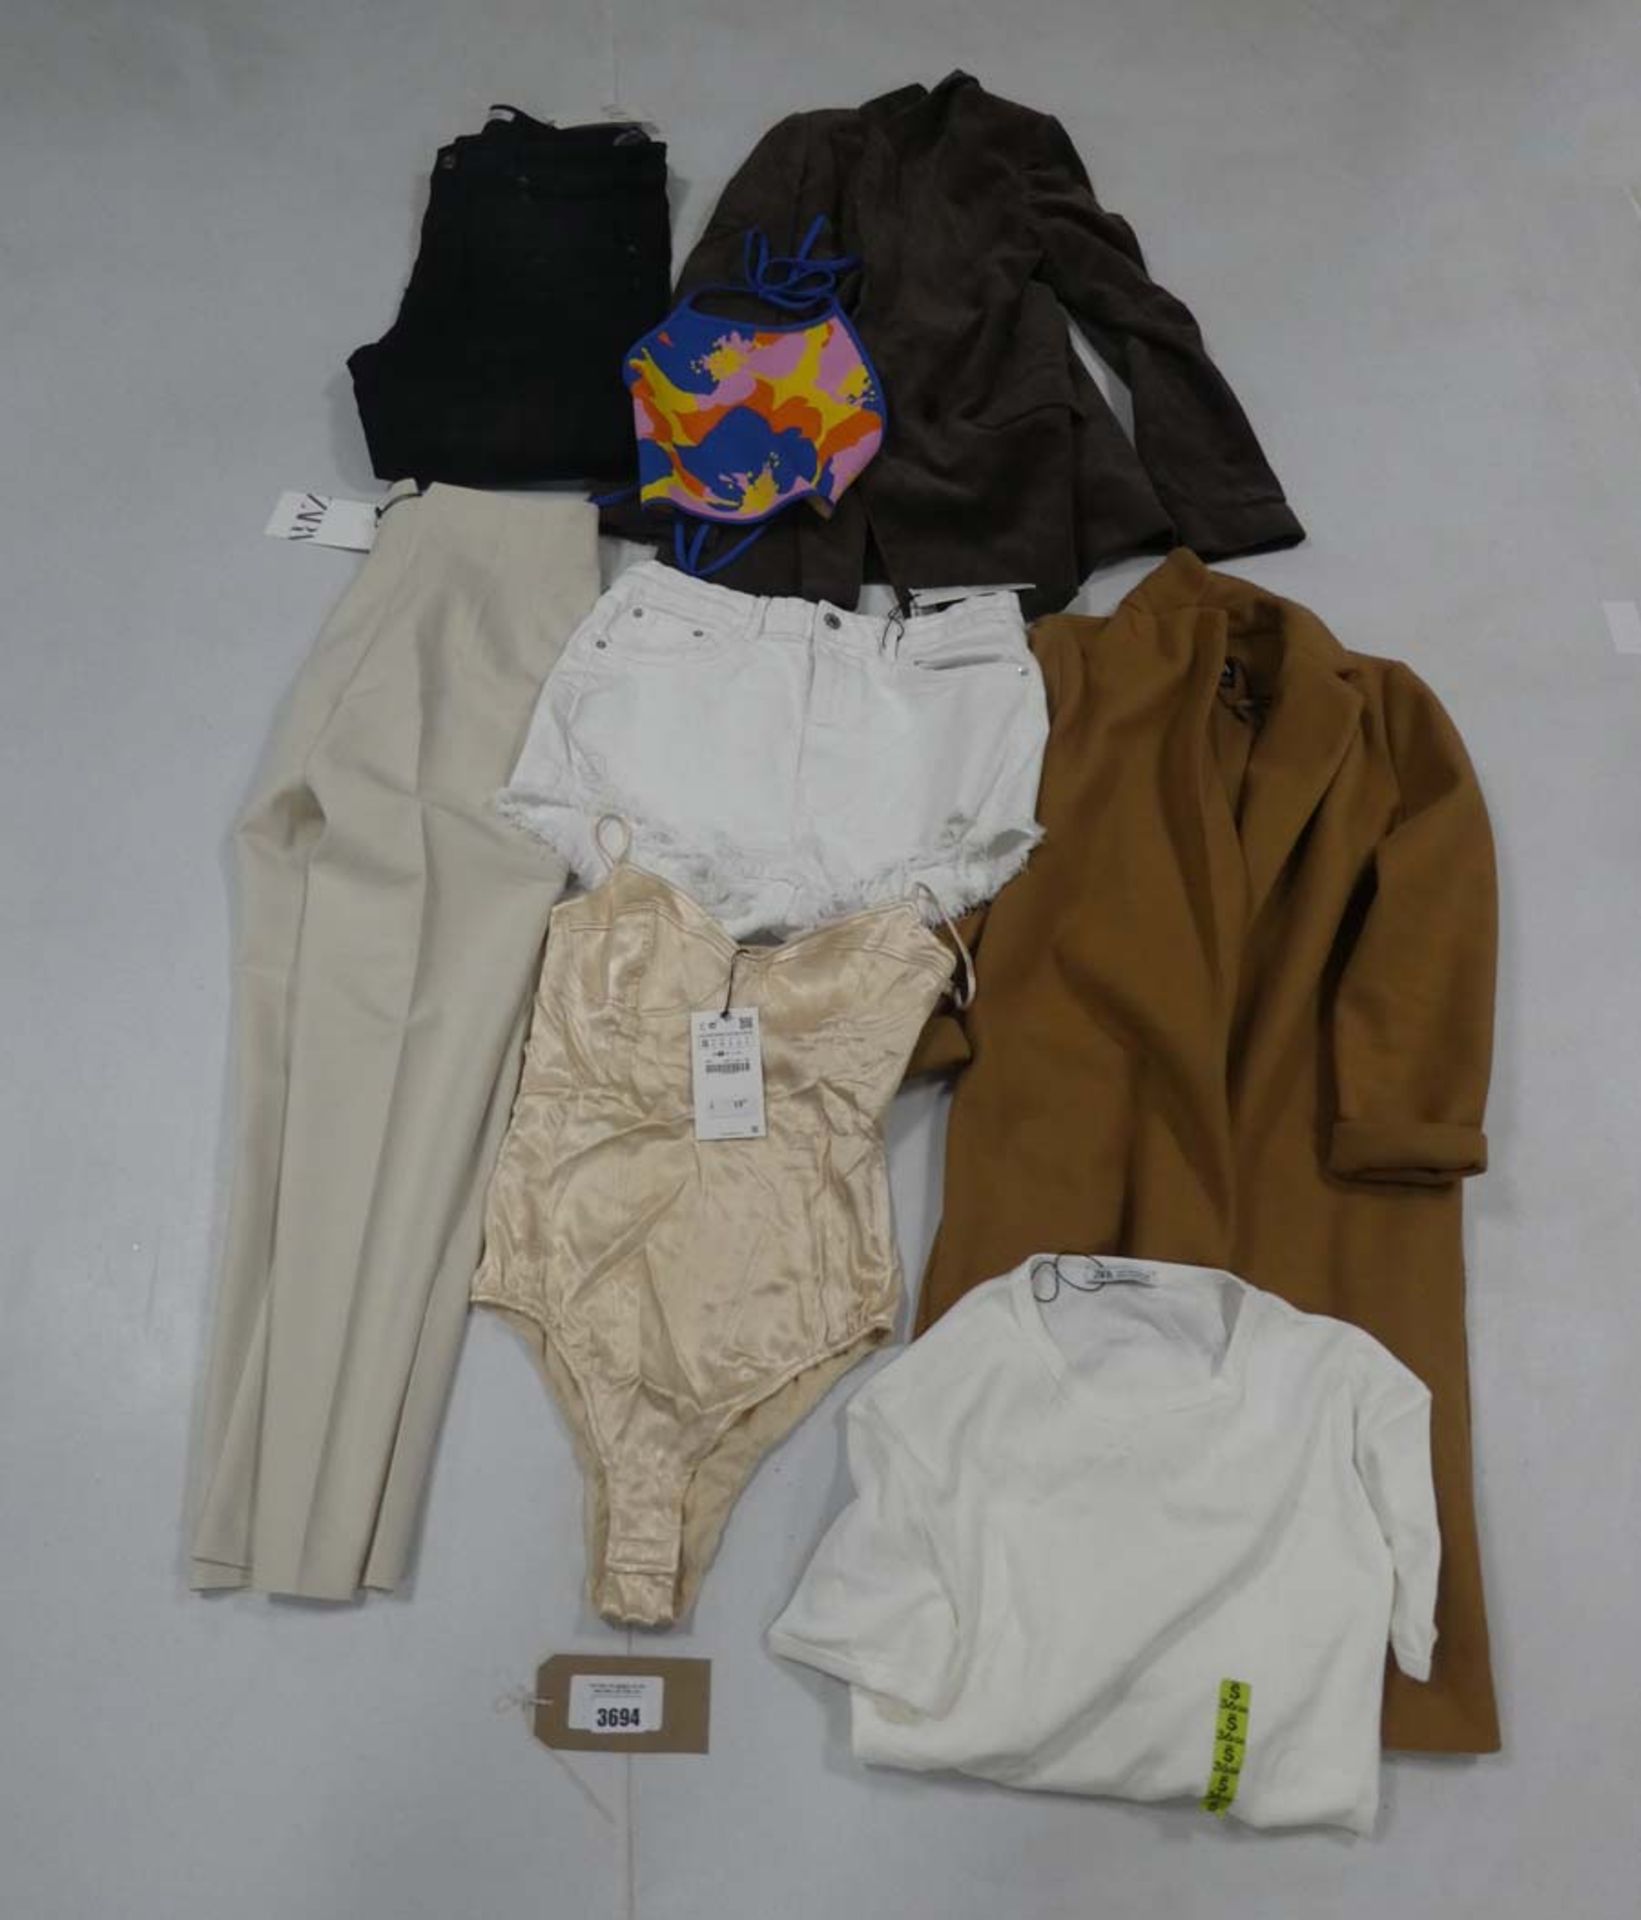 Selection of Zara clothing to include jackets, trousers, tops, etc